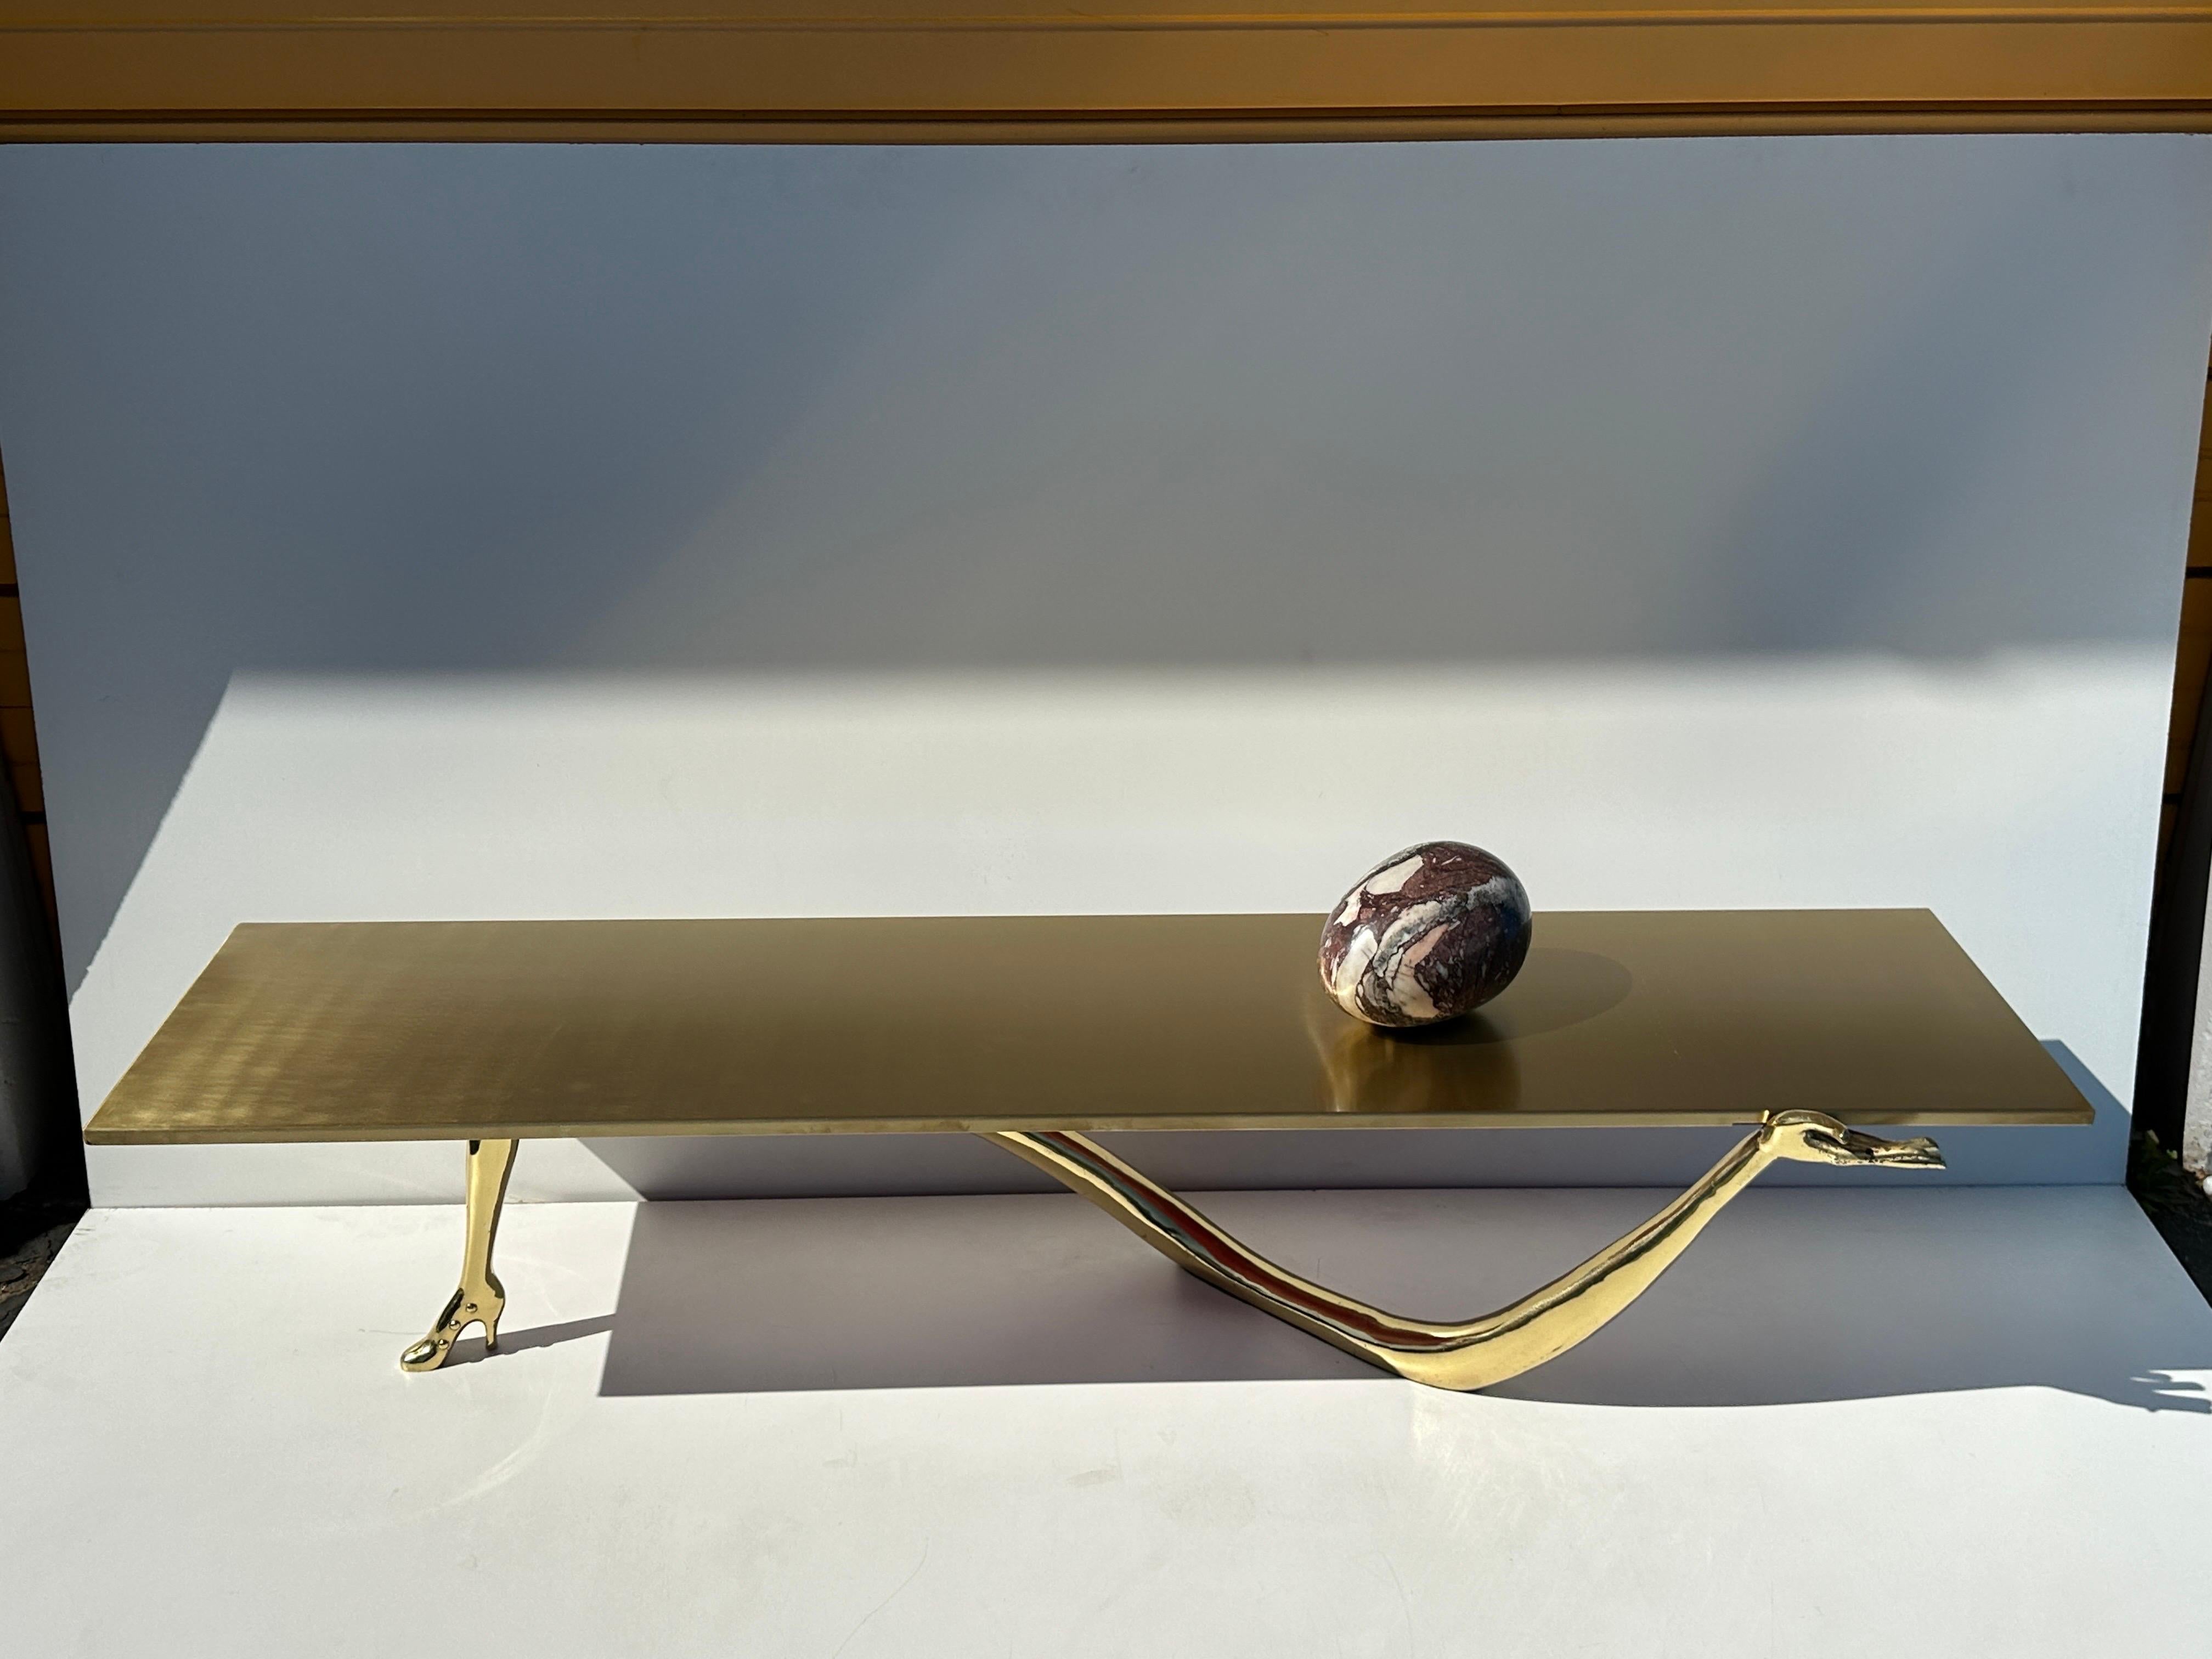 LEDA brass coffee table by Salvador Dali. Beautiful example of Dali’s surrealist hand and high heel sculpture holding a brushed brass table top with a marble egg. Originally designed in 1935, made in 2000s by B. D. Barcelona